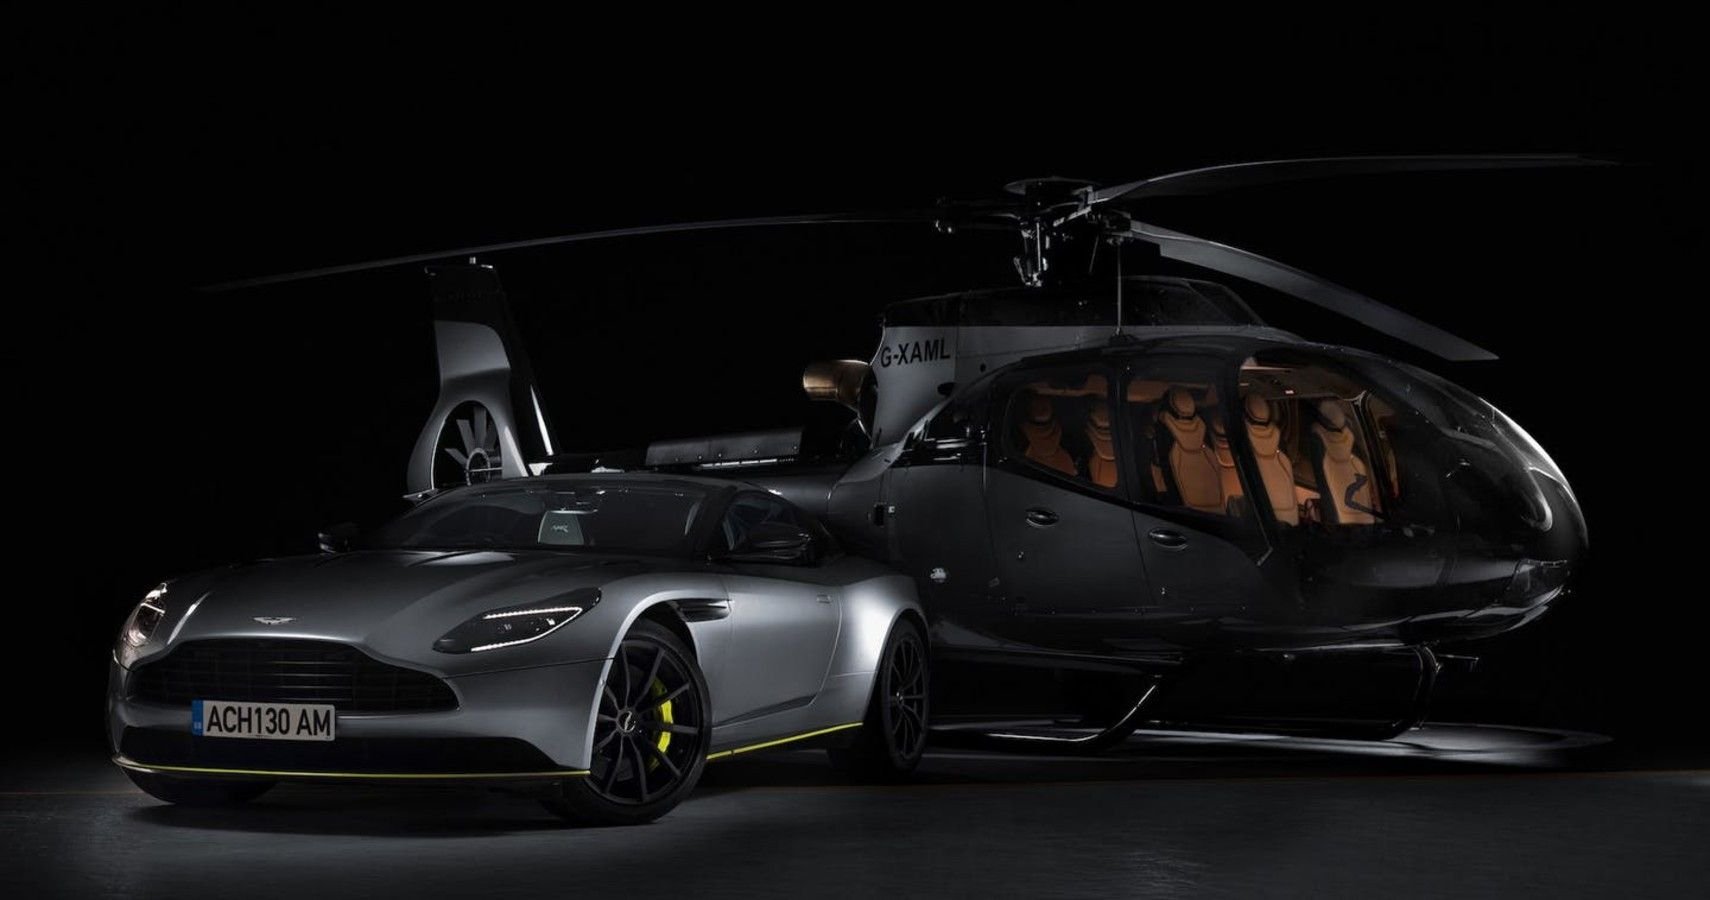 Aston-Martin Edition Airbus ACH130 Helicopter Takes Flight